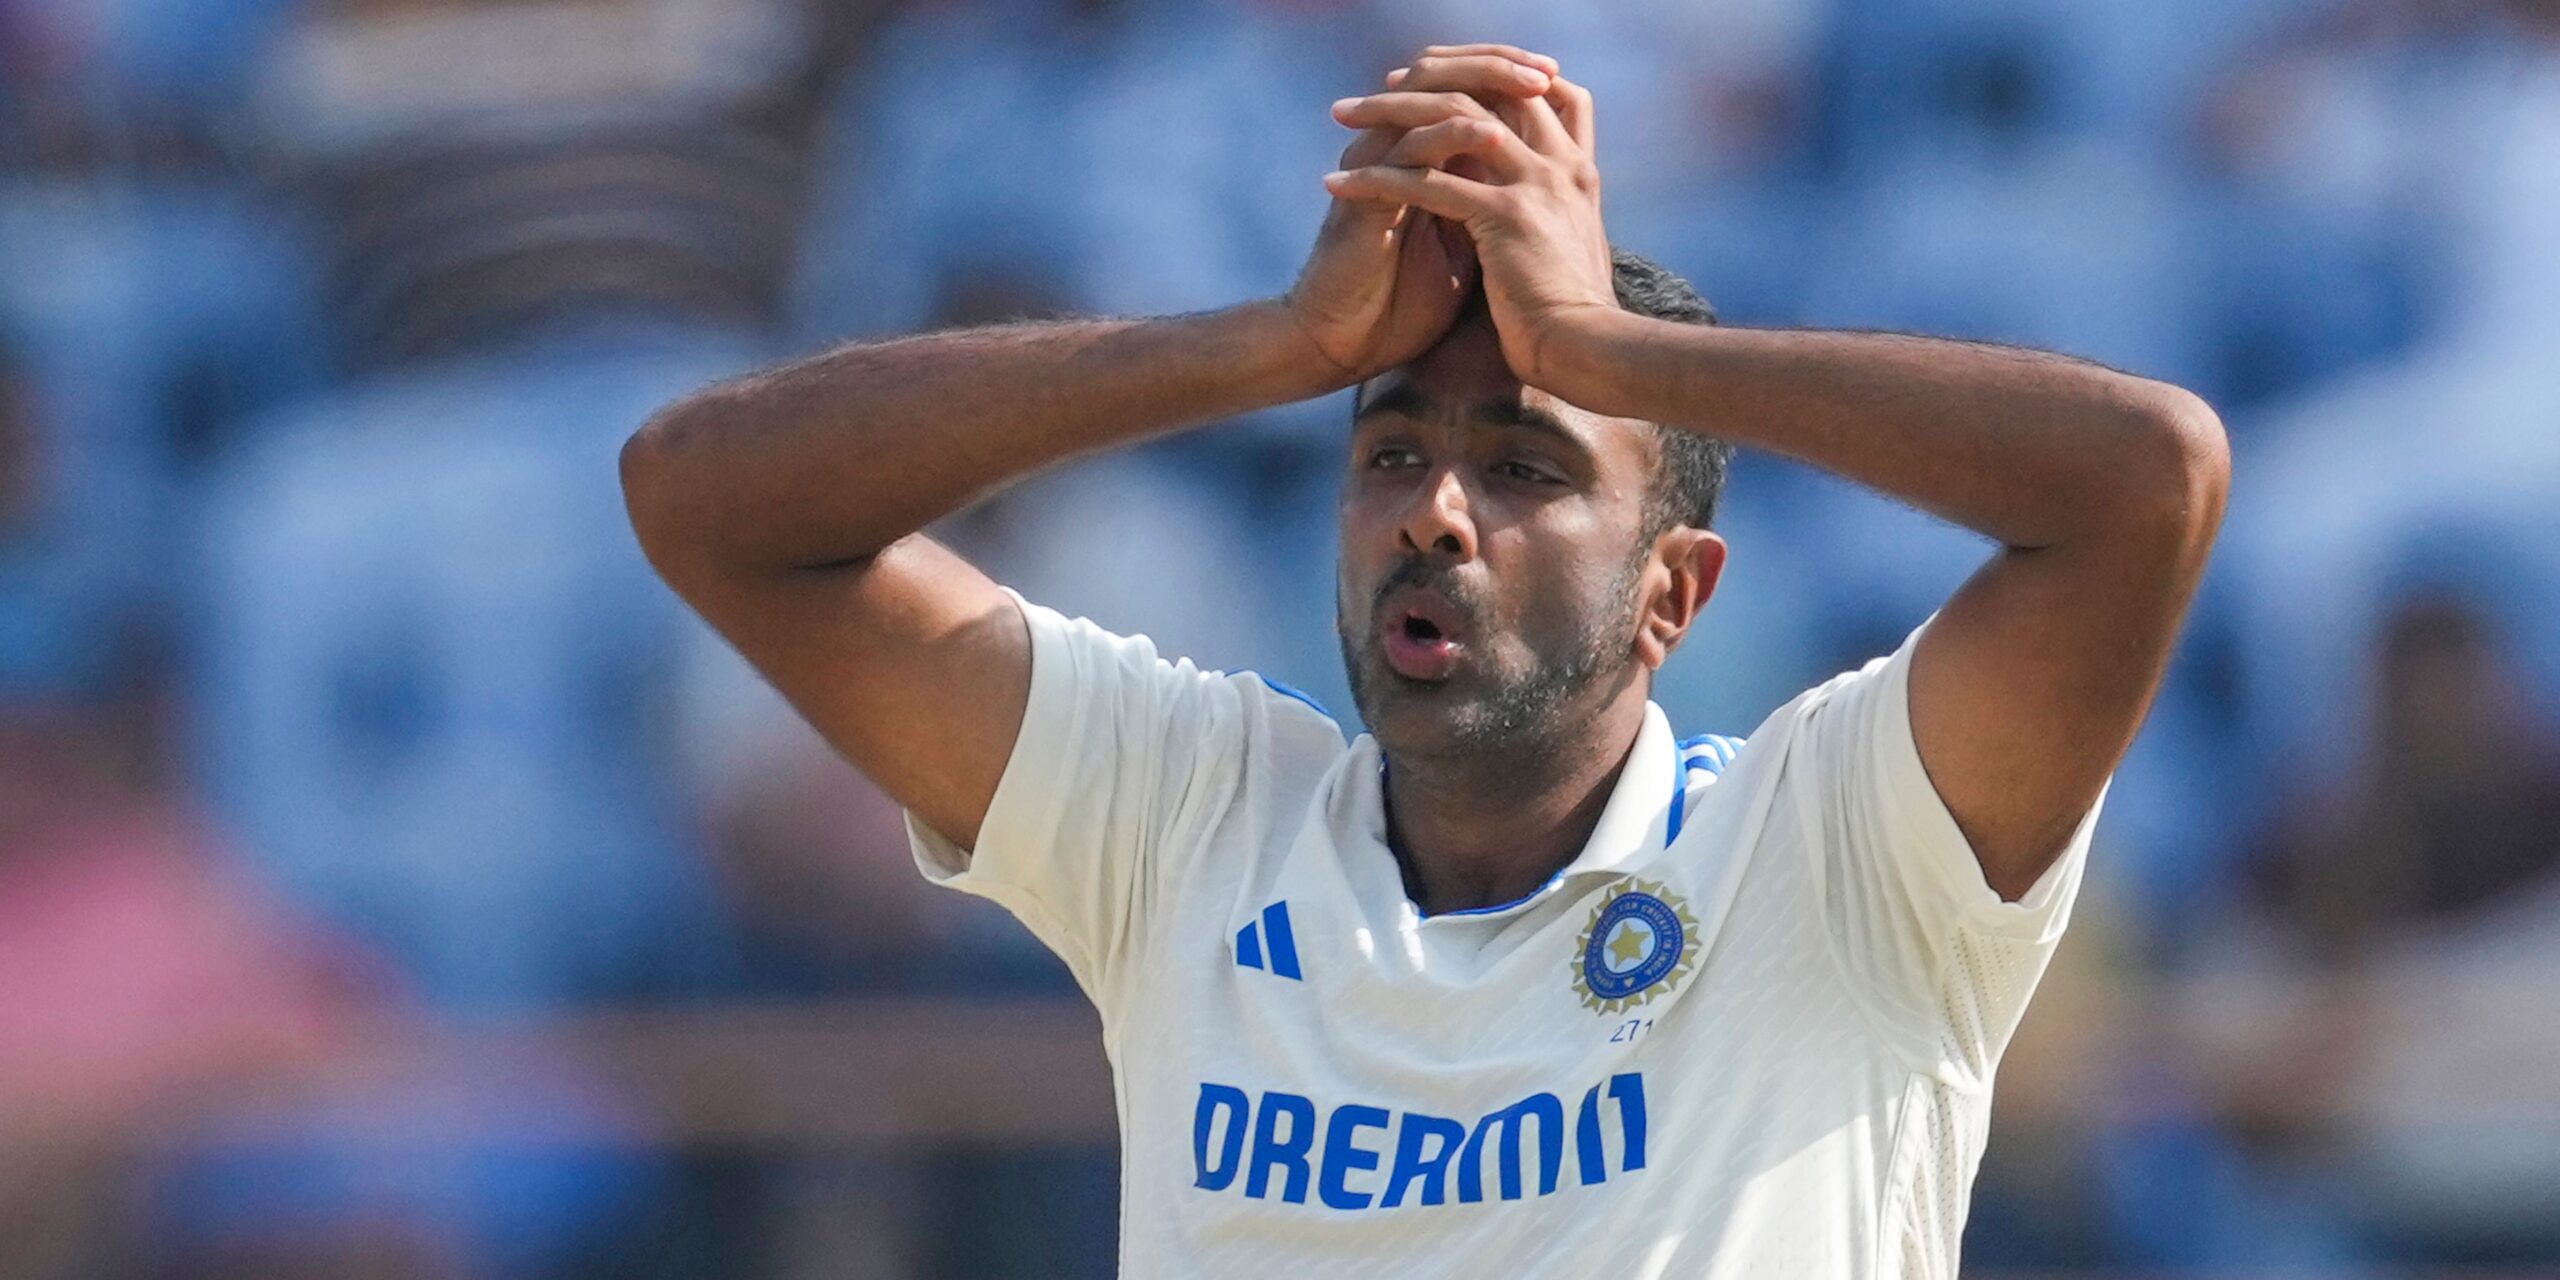 "Ravi Ashwin Withdraws from Third Test Amidst Family Emergency: Cricket World Reacts"